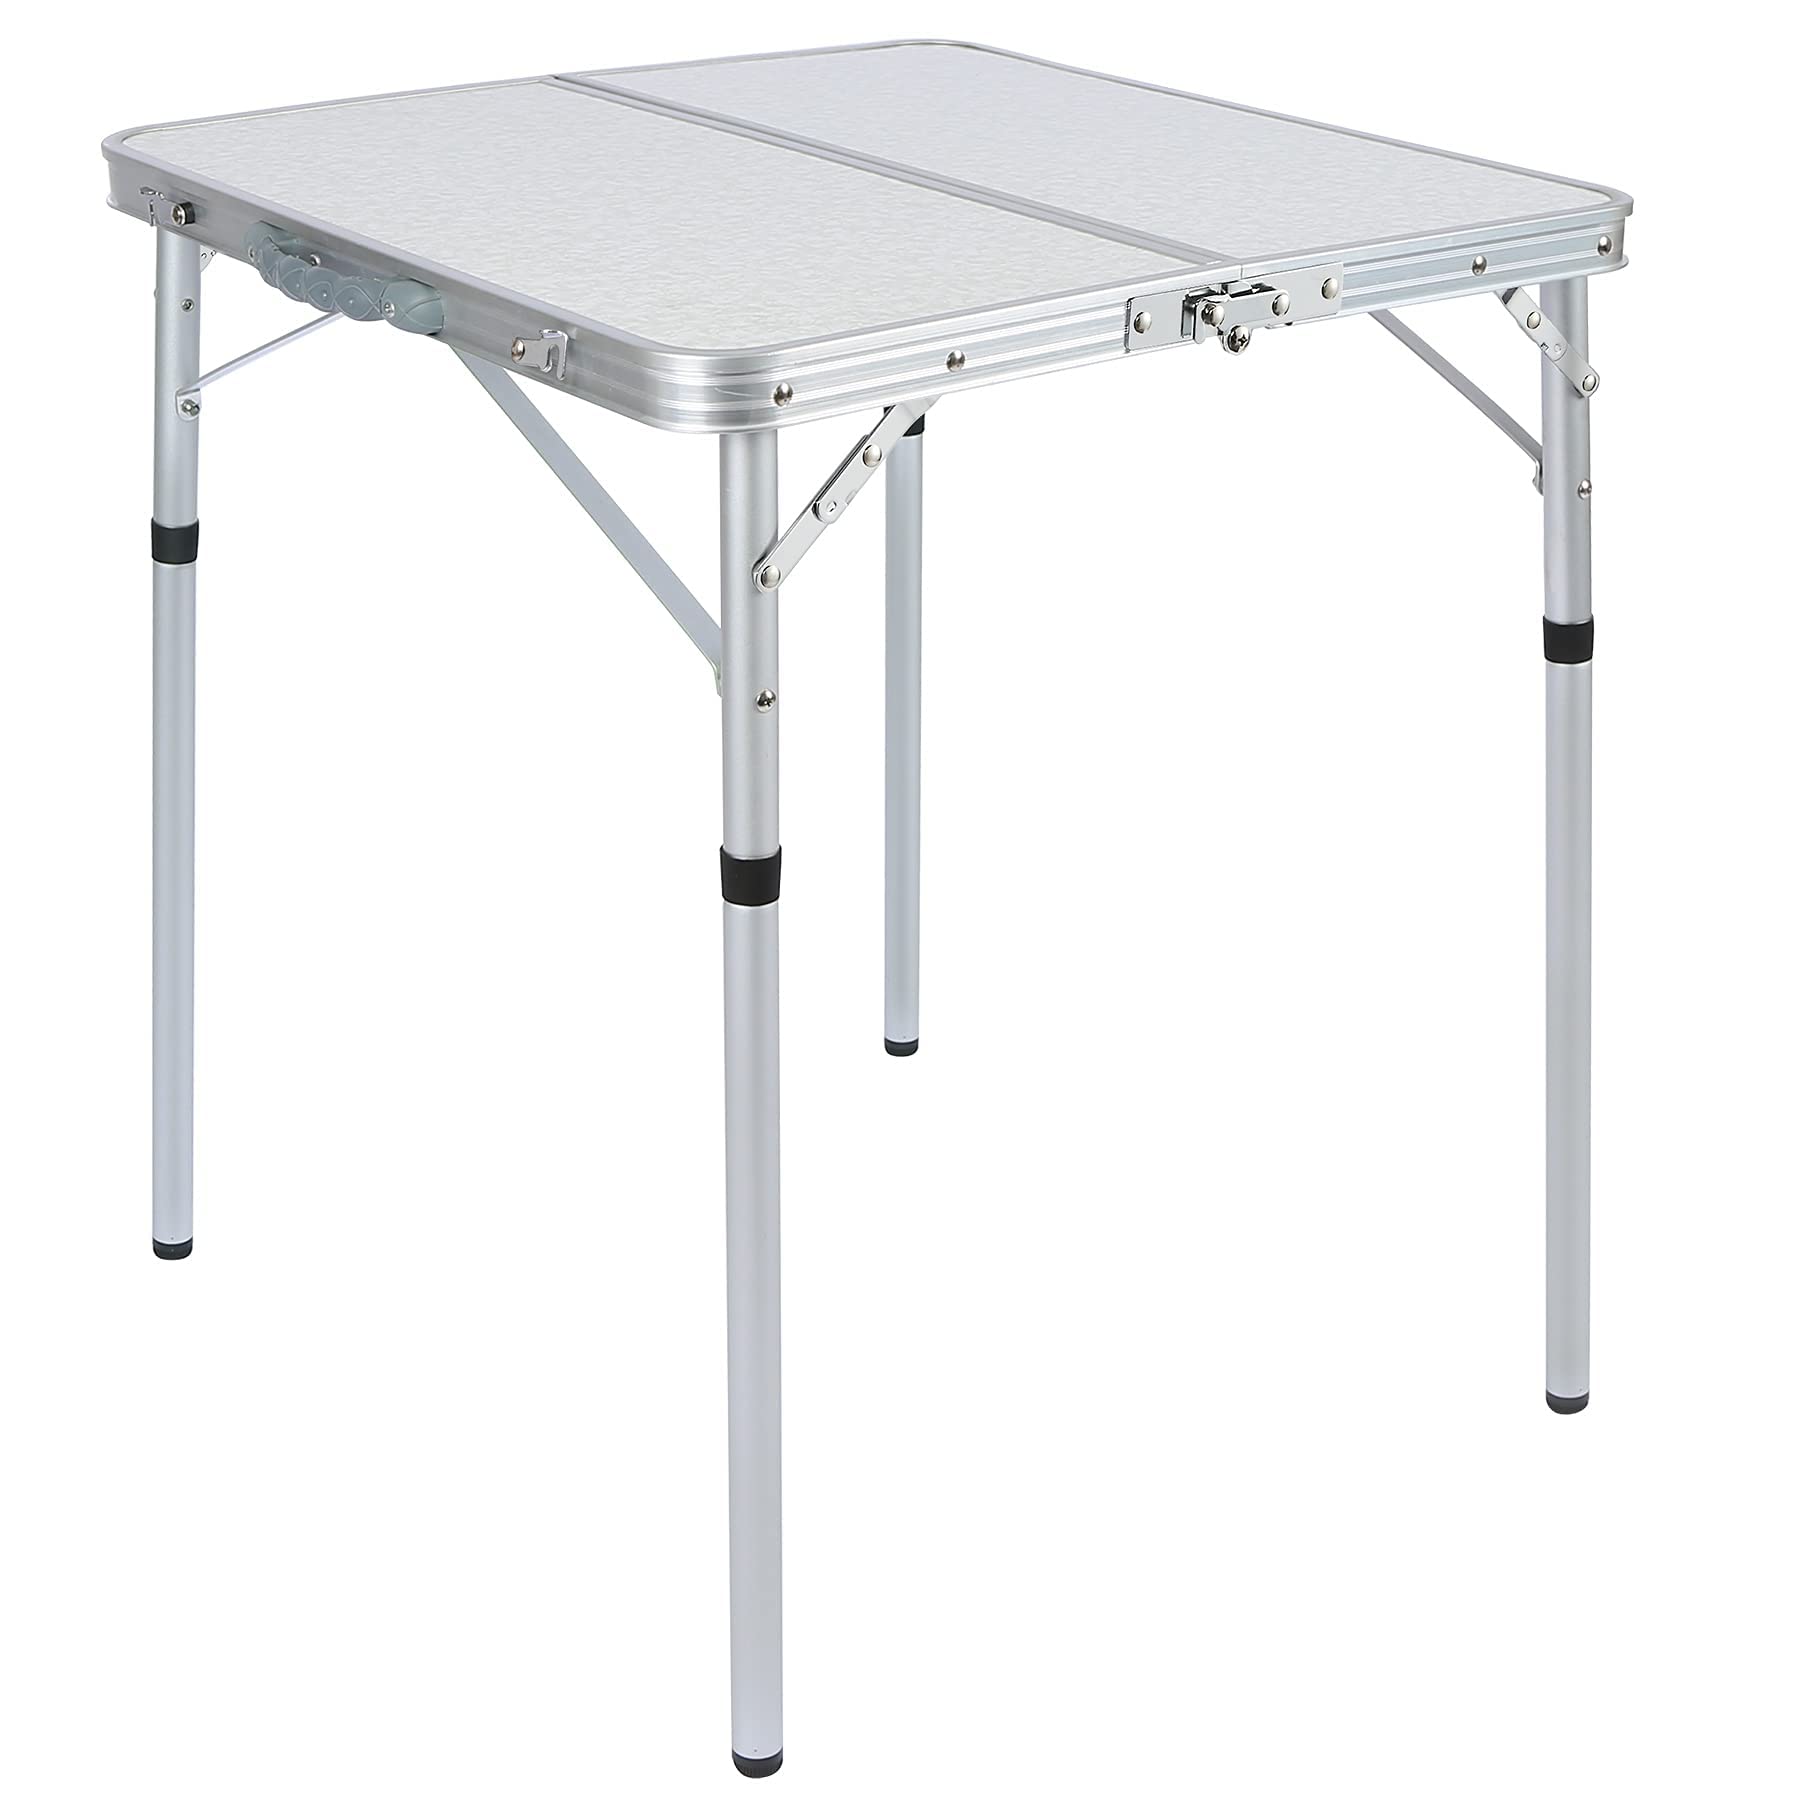 REDCAMP Small Square Folding Table 2 Foot, Portable Aluminum Camping Table Adjustable Height Lightweight for Picnic Beach Outdoo